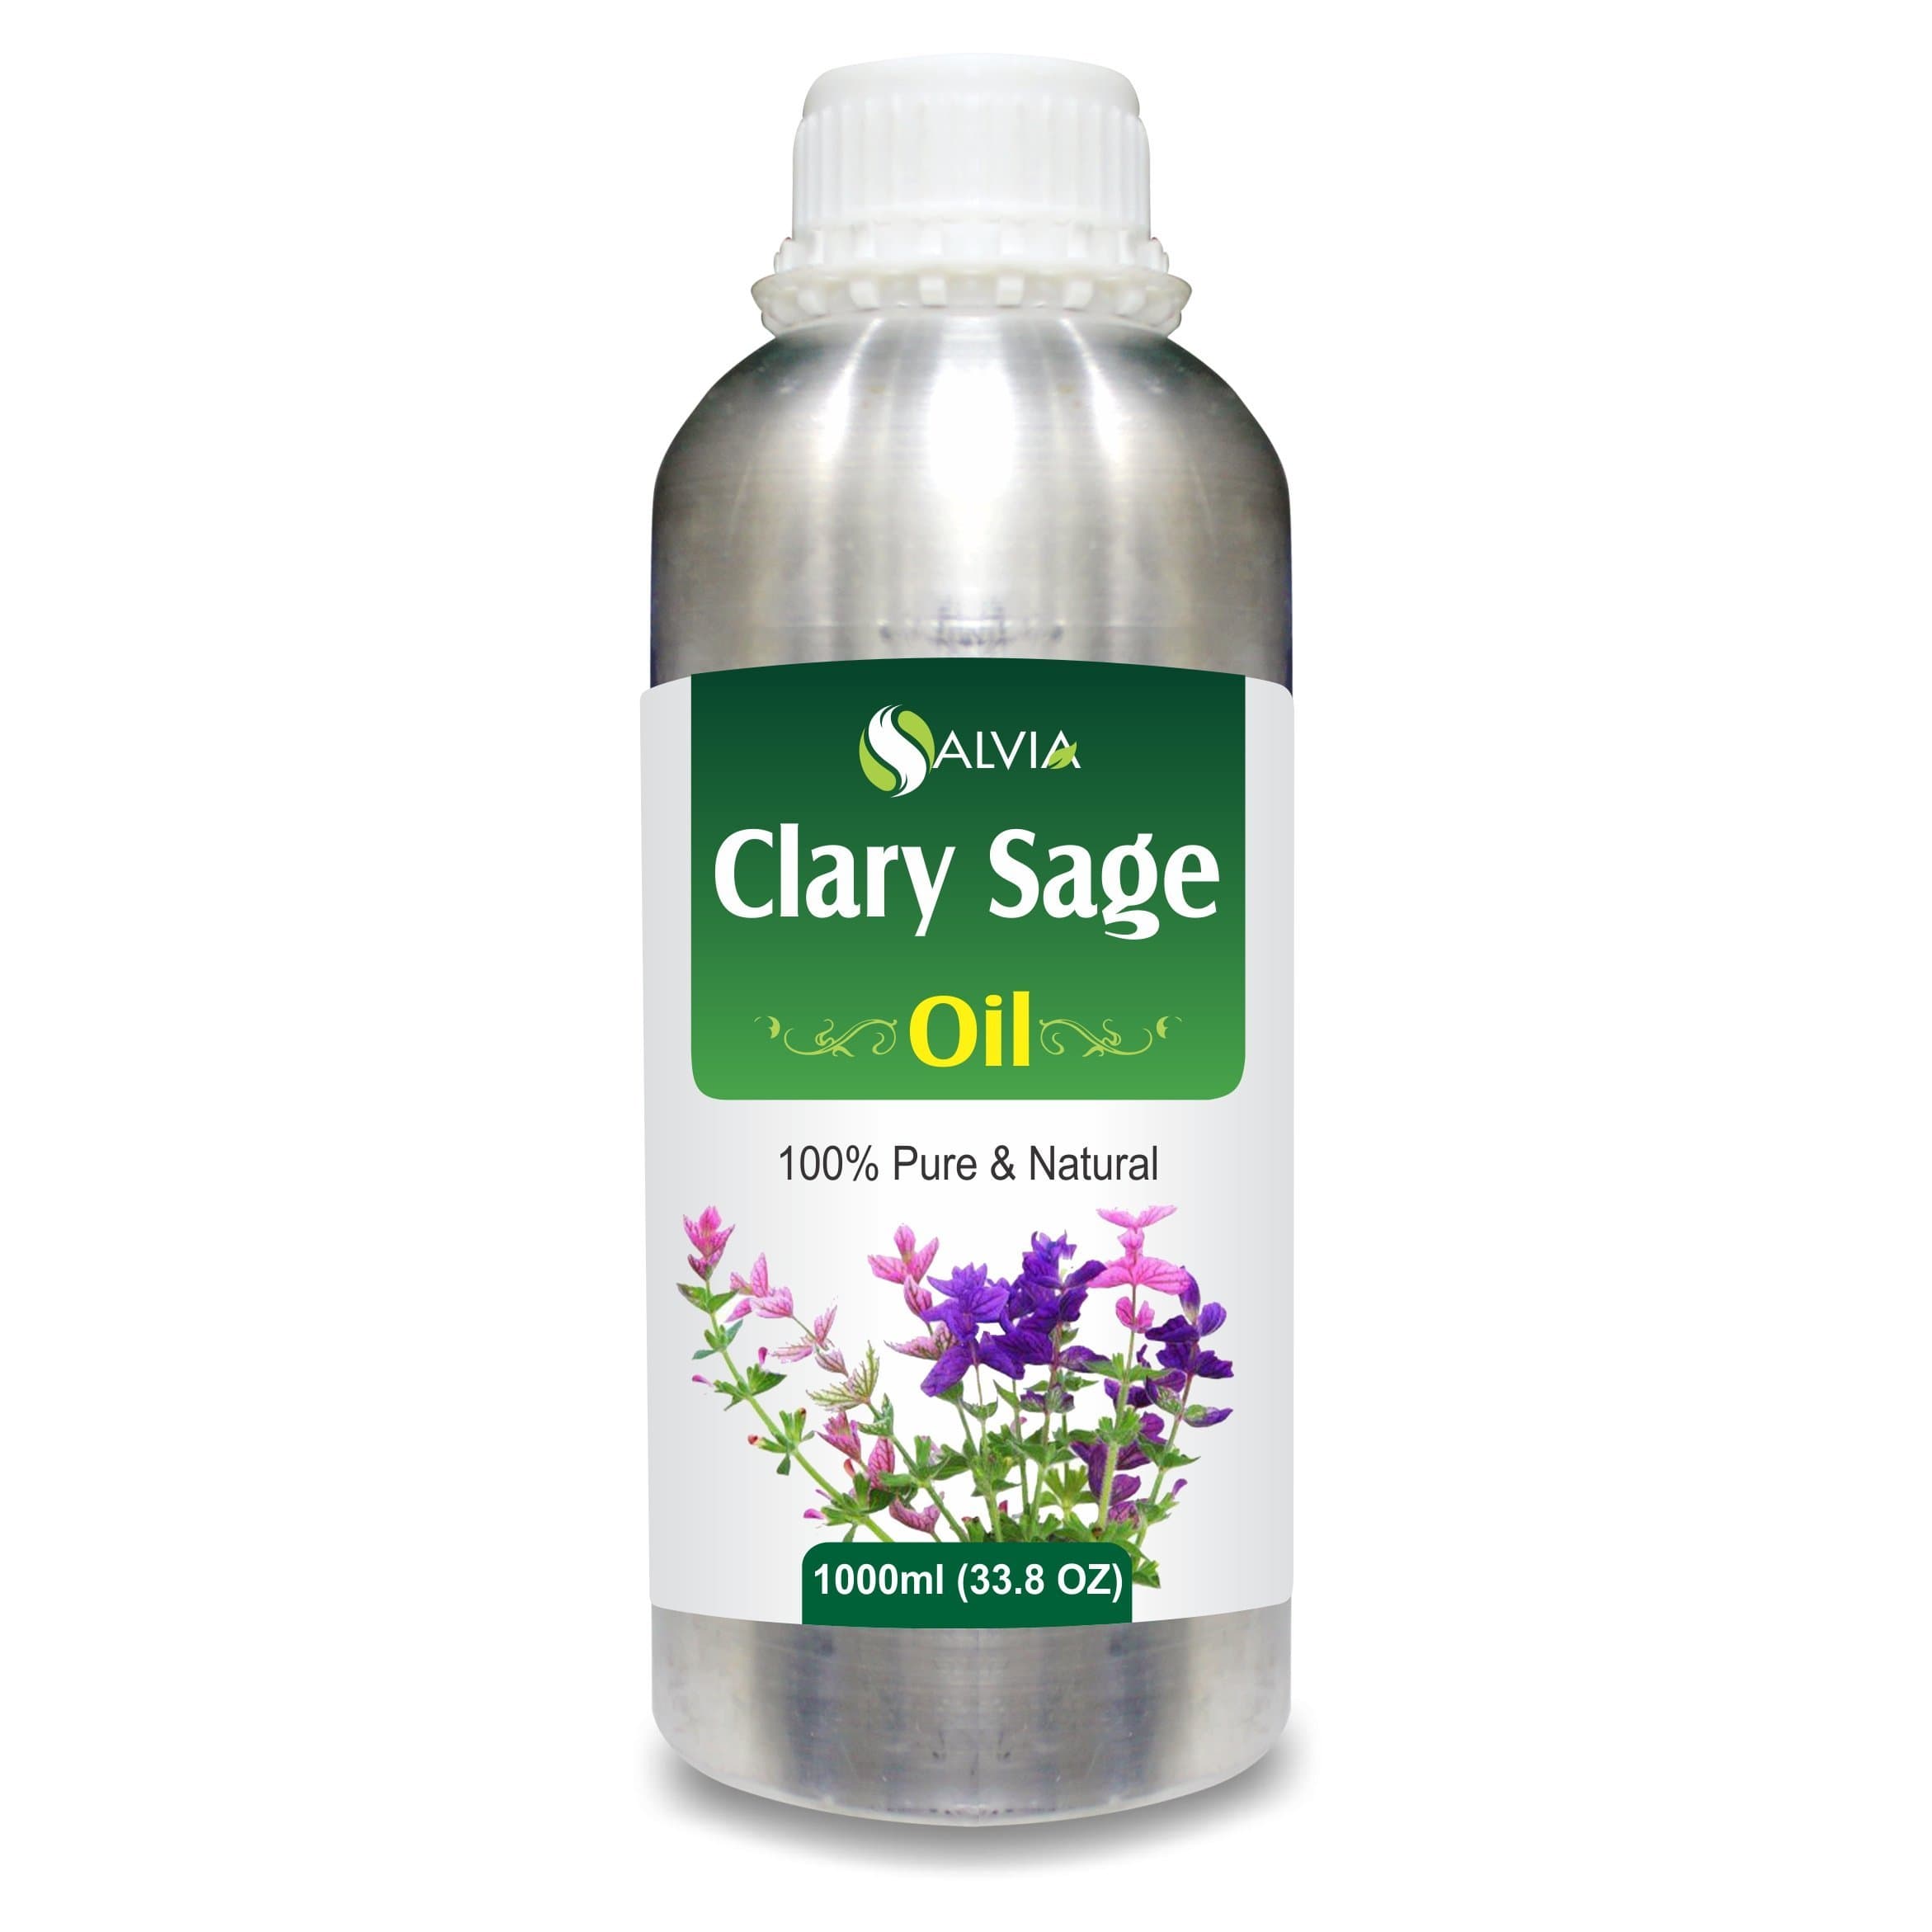 clary sage oil for face